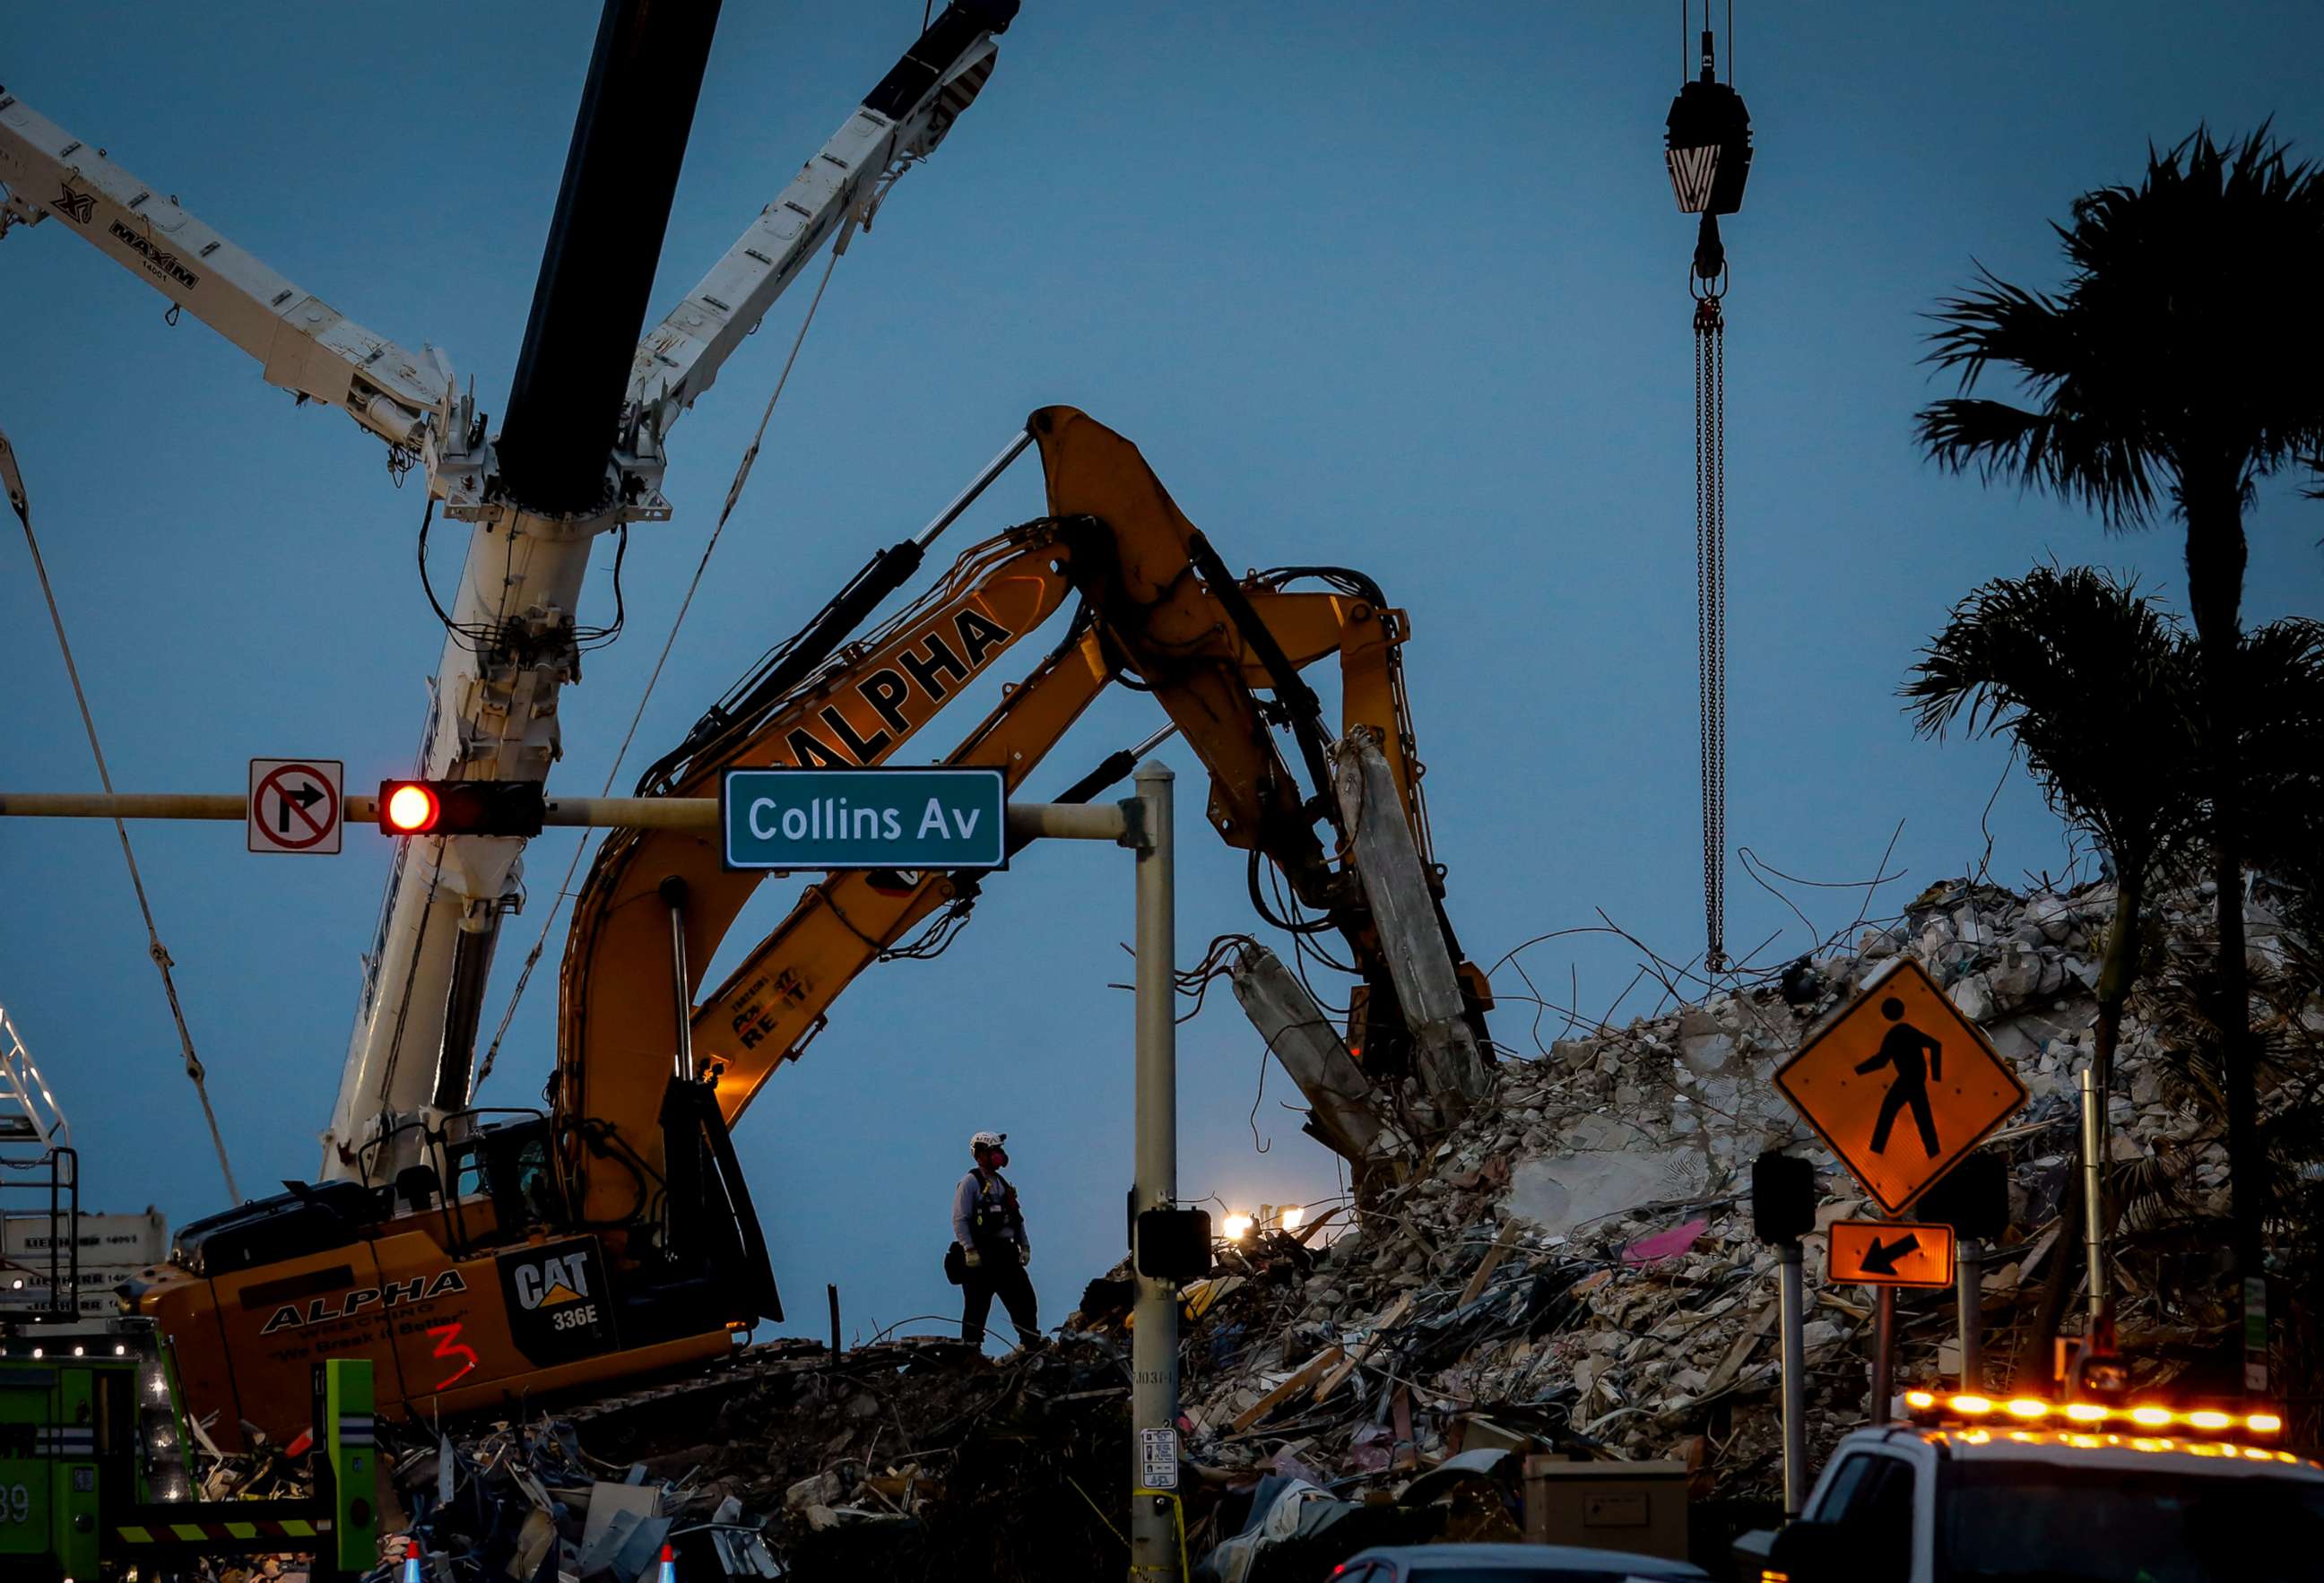 PHOTO: Search and rescue teams continue to work in the rubble at the site of the collapsed Champlain Towers South condo in Surfside, Fla., July 6, 2021.